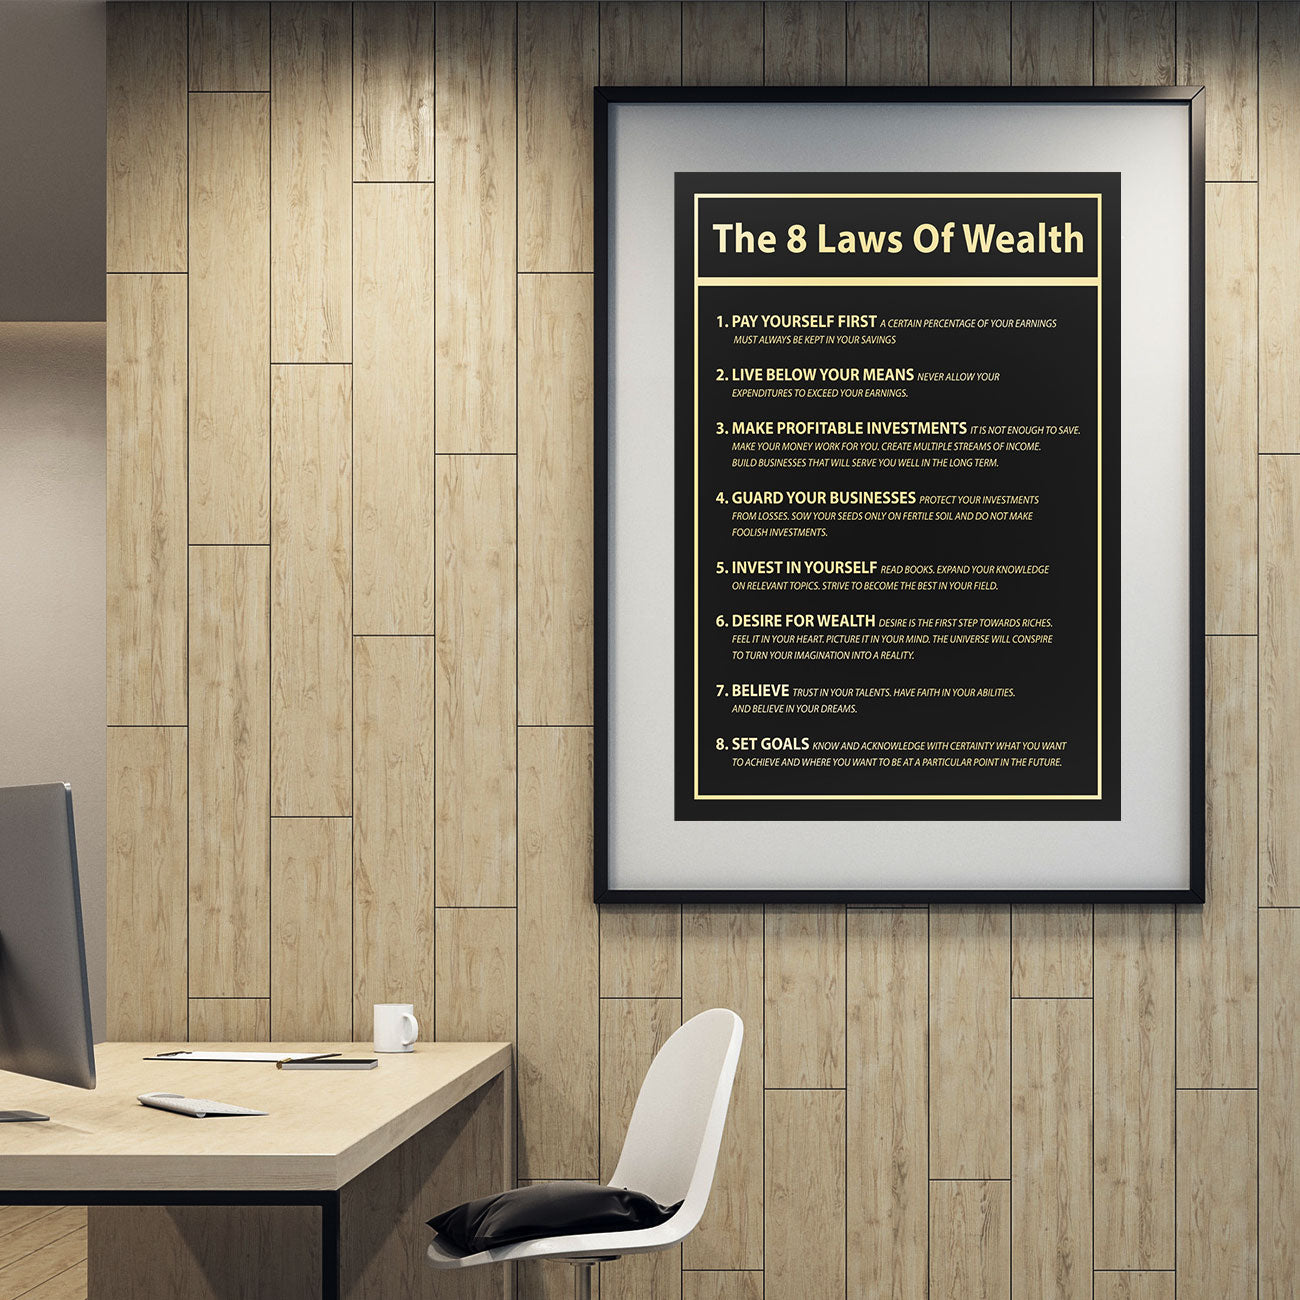 The 8 Laws Of Wealth